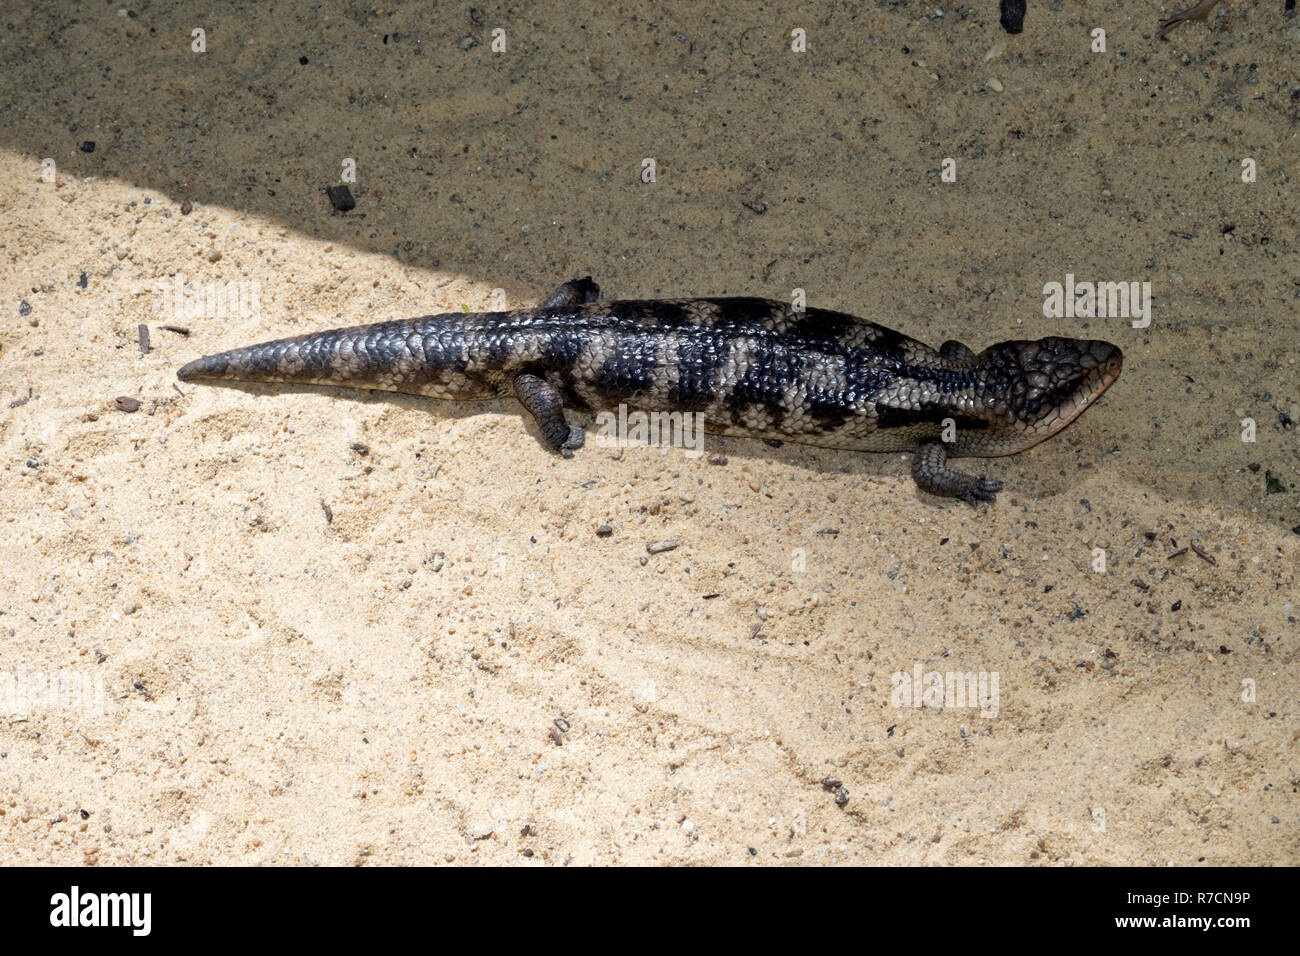 this is a side view of a blue tongue lizard Stock Photo